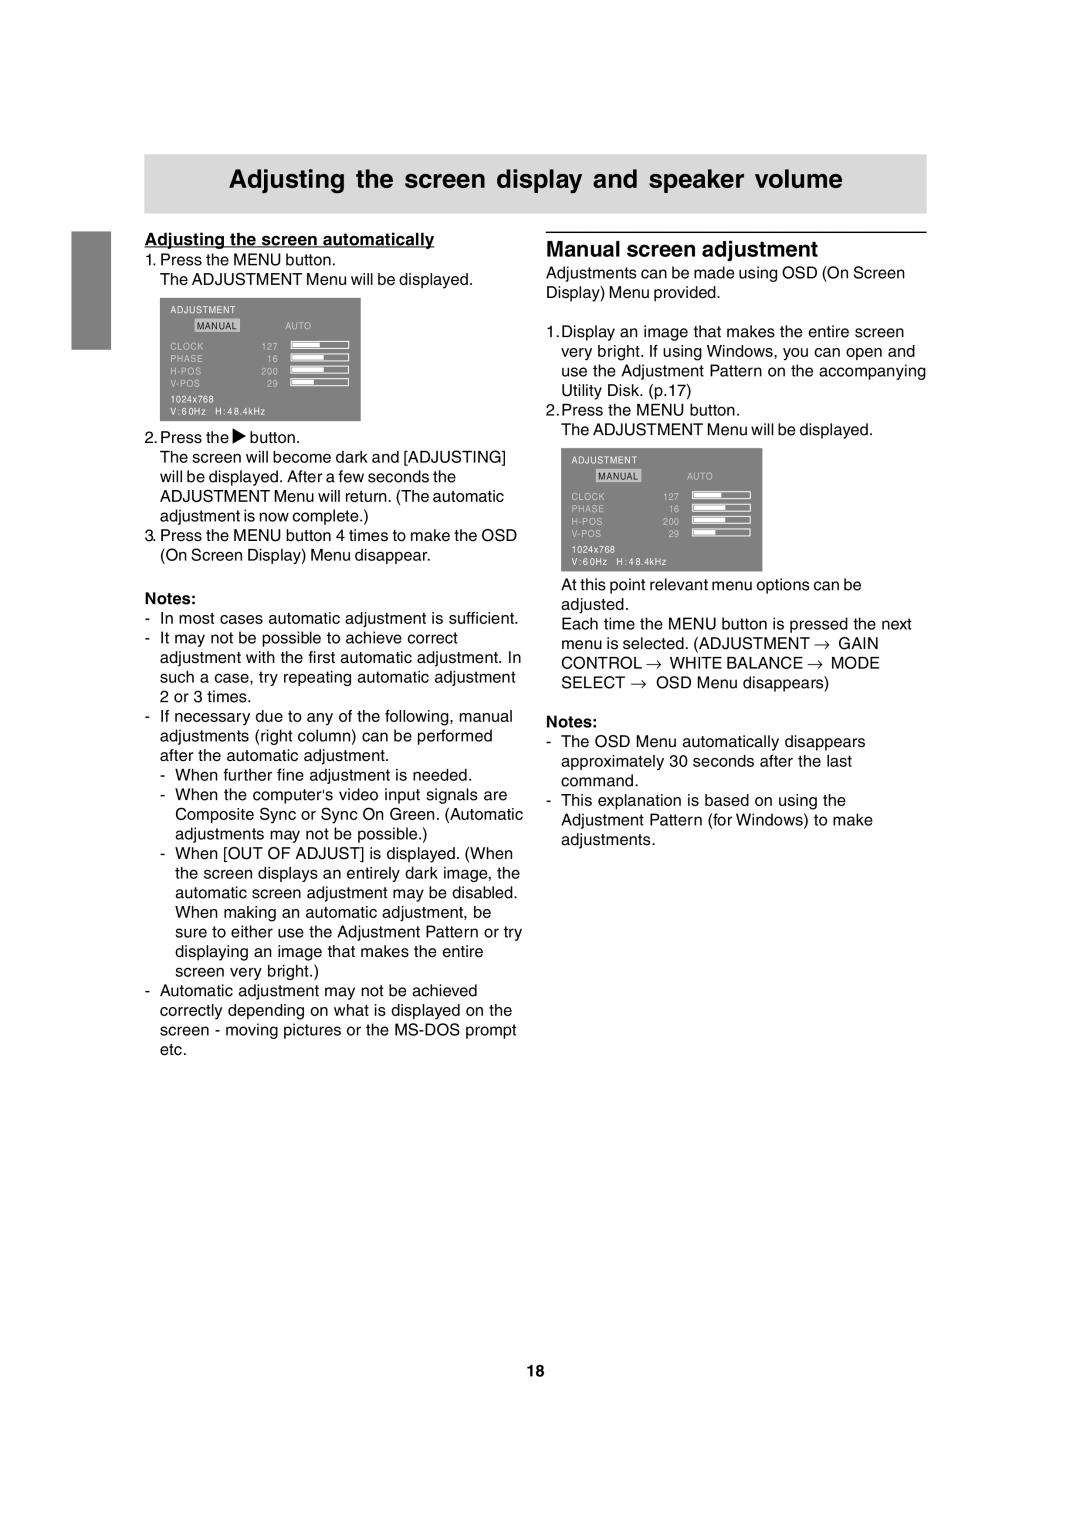 Sharp LL-T15A4 operation manual Manual screen adjustment, Adjusting the screen automatically 